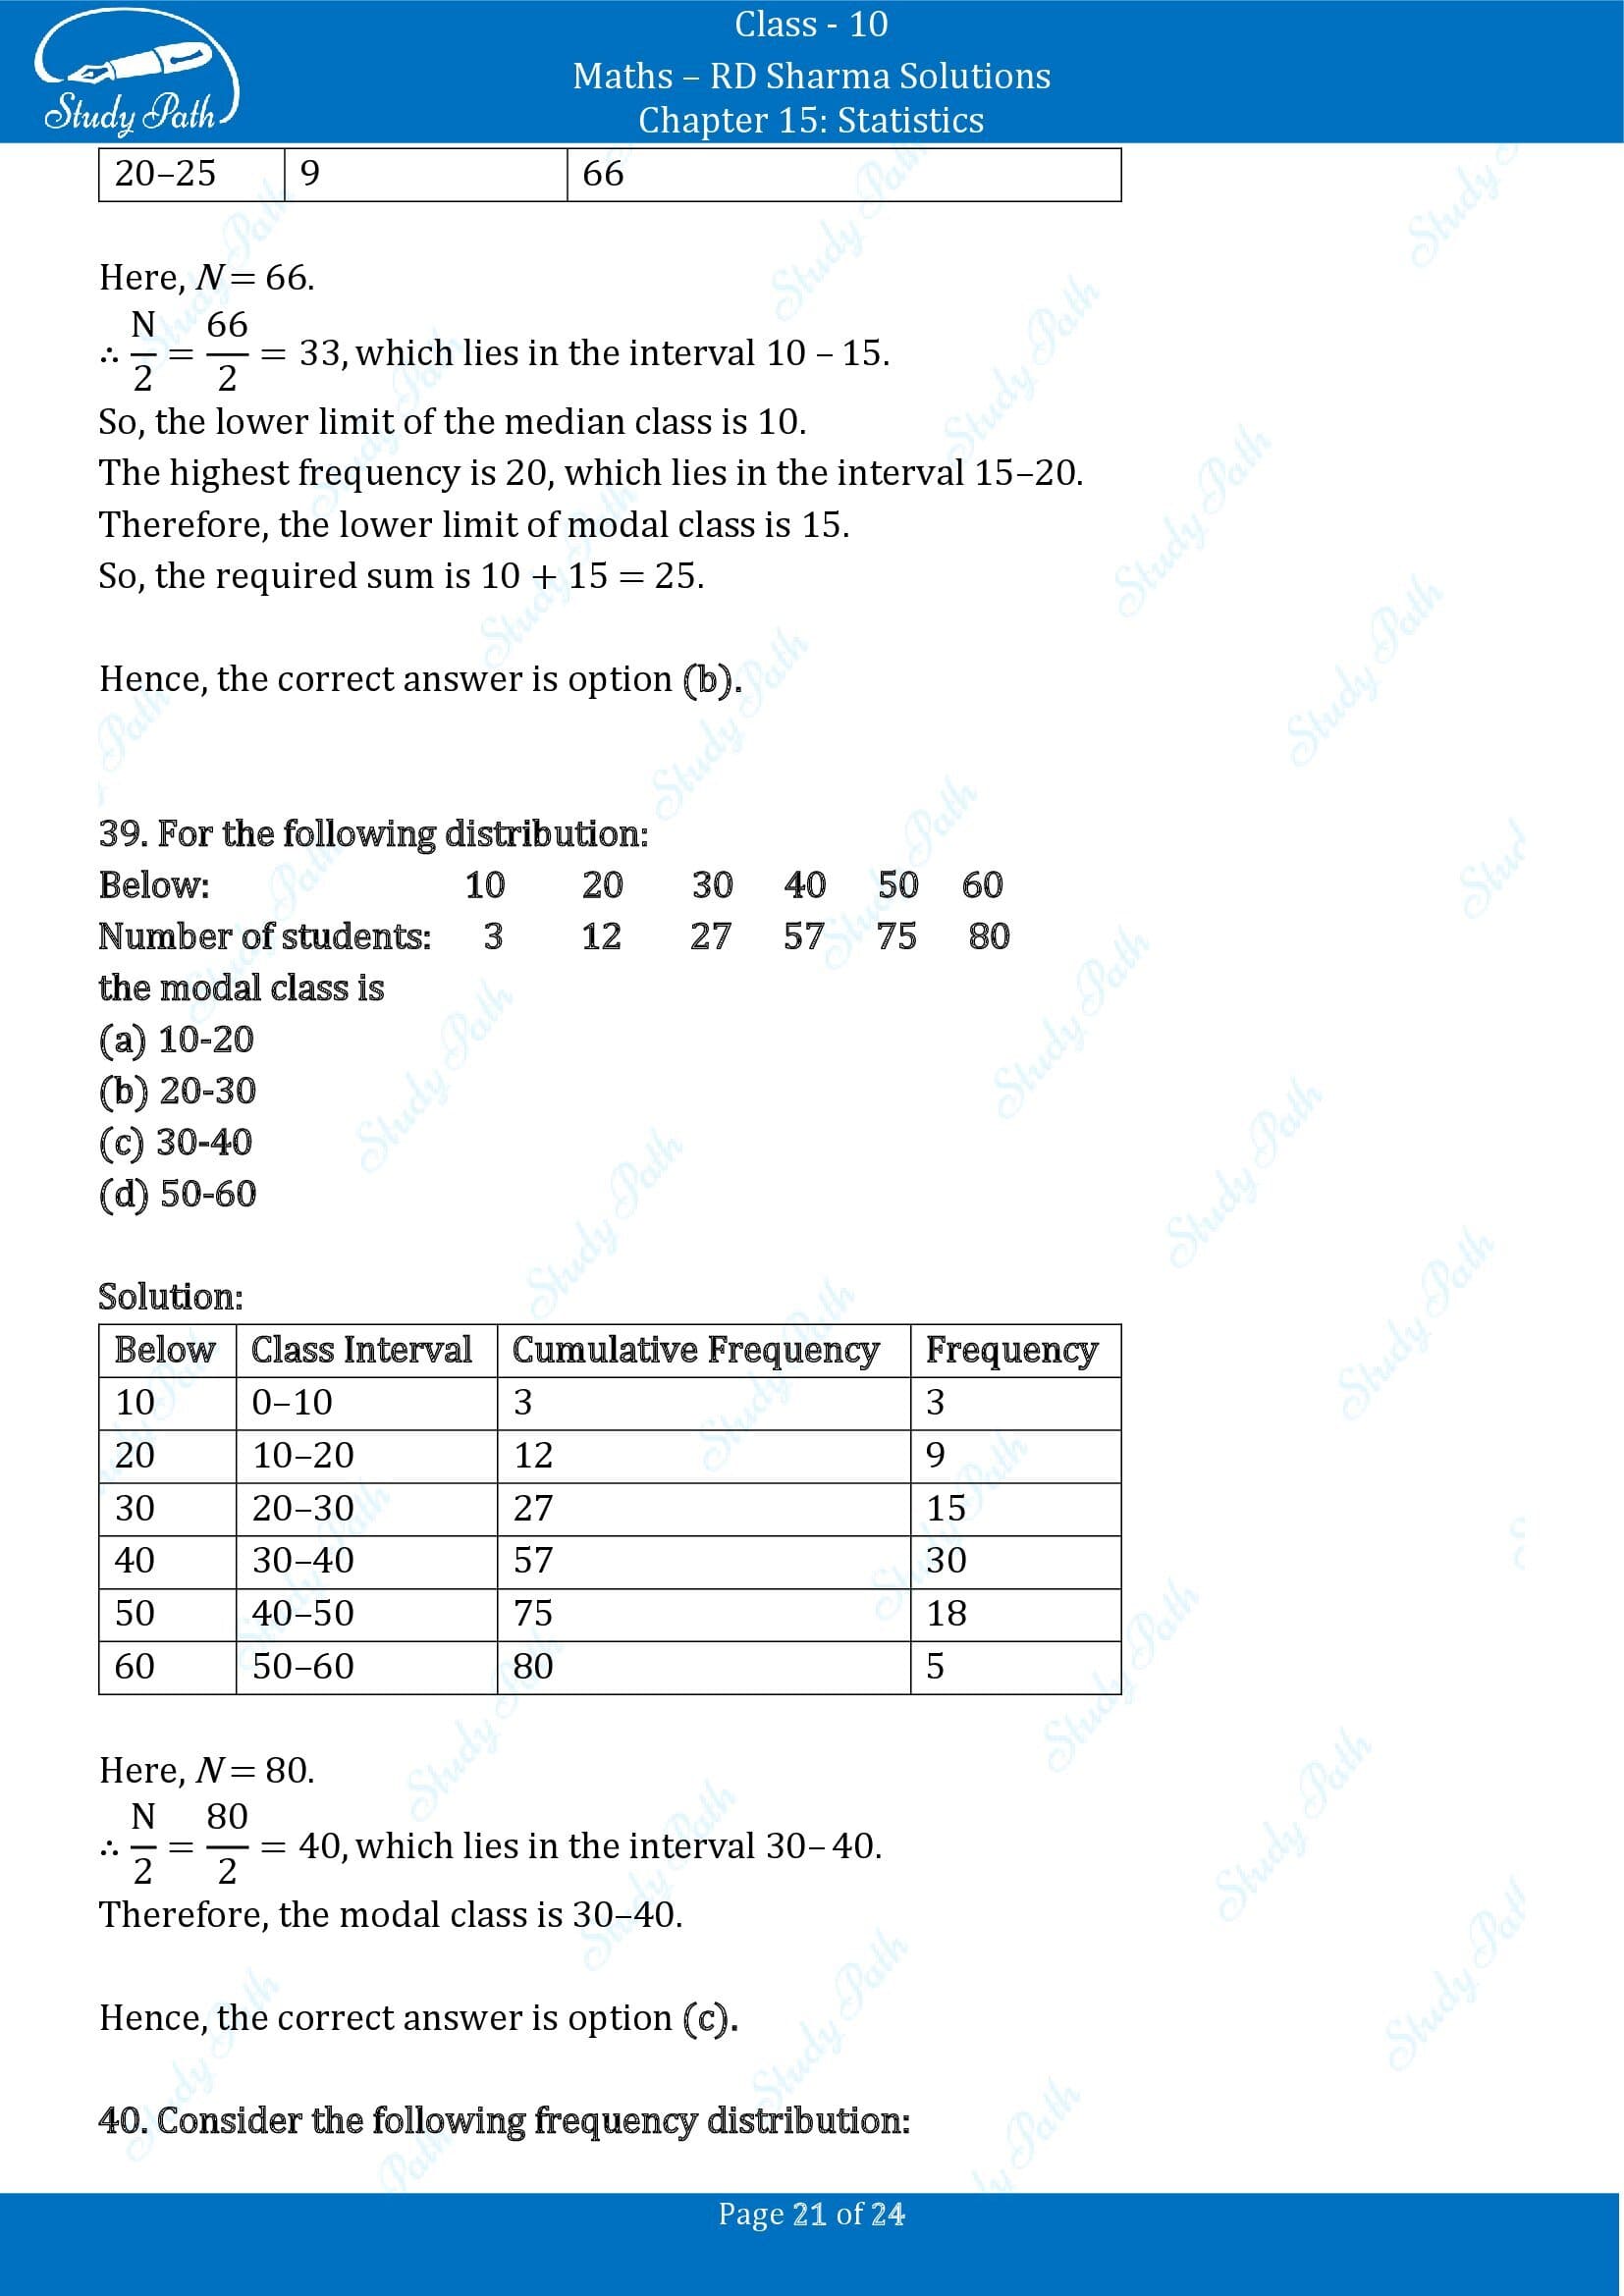 RD Sharma Solutions Class 10 Chapter 15 Statistics Multiple Choice Question MCQs 00021